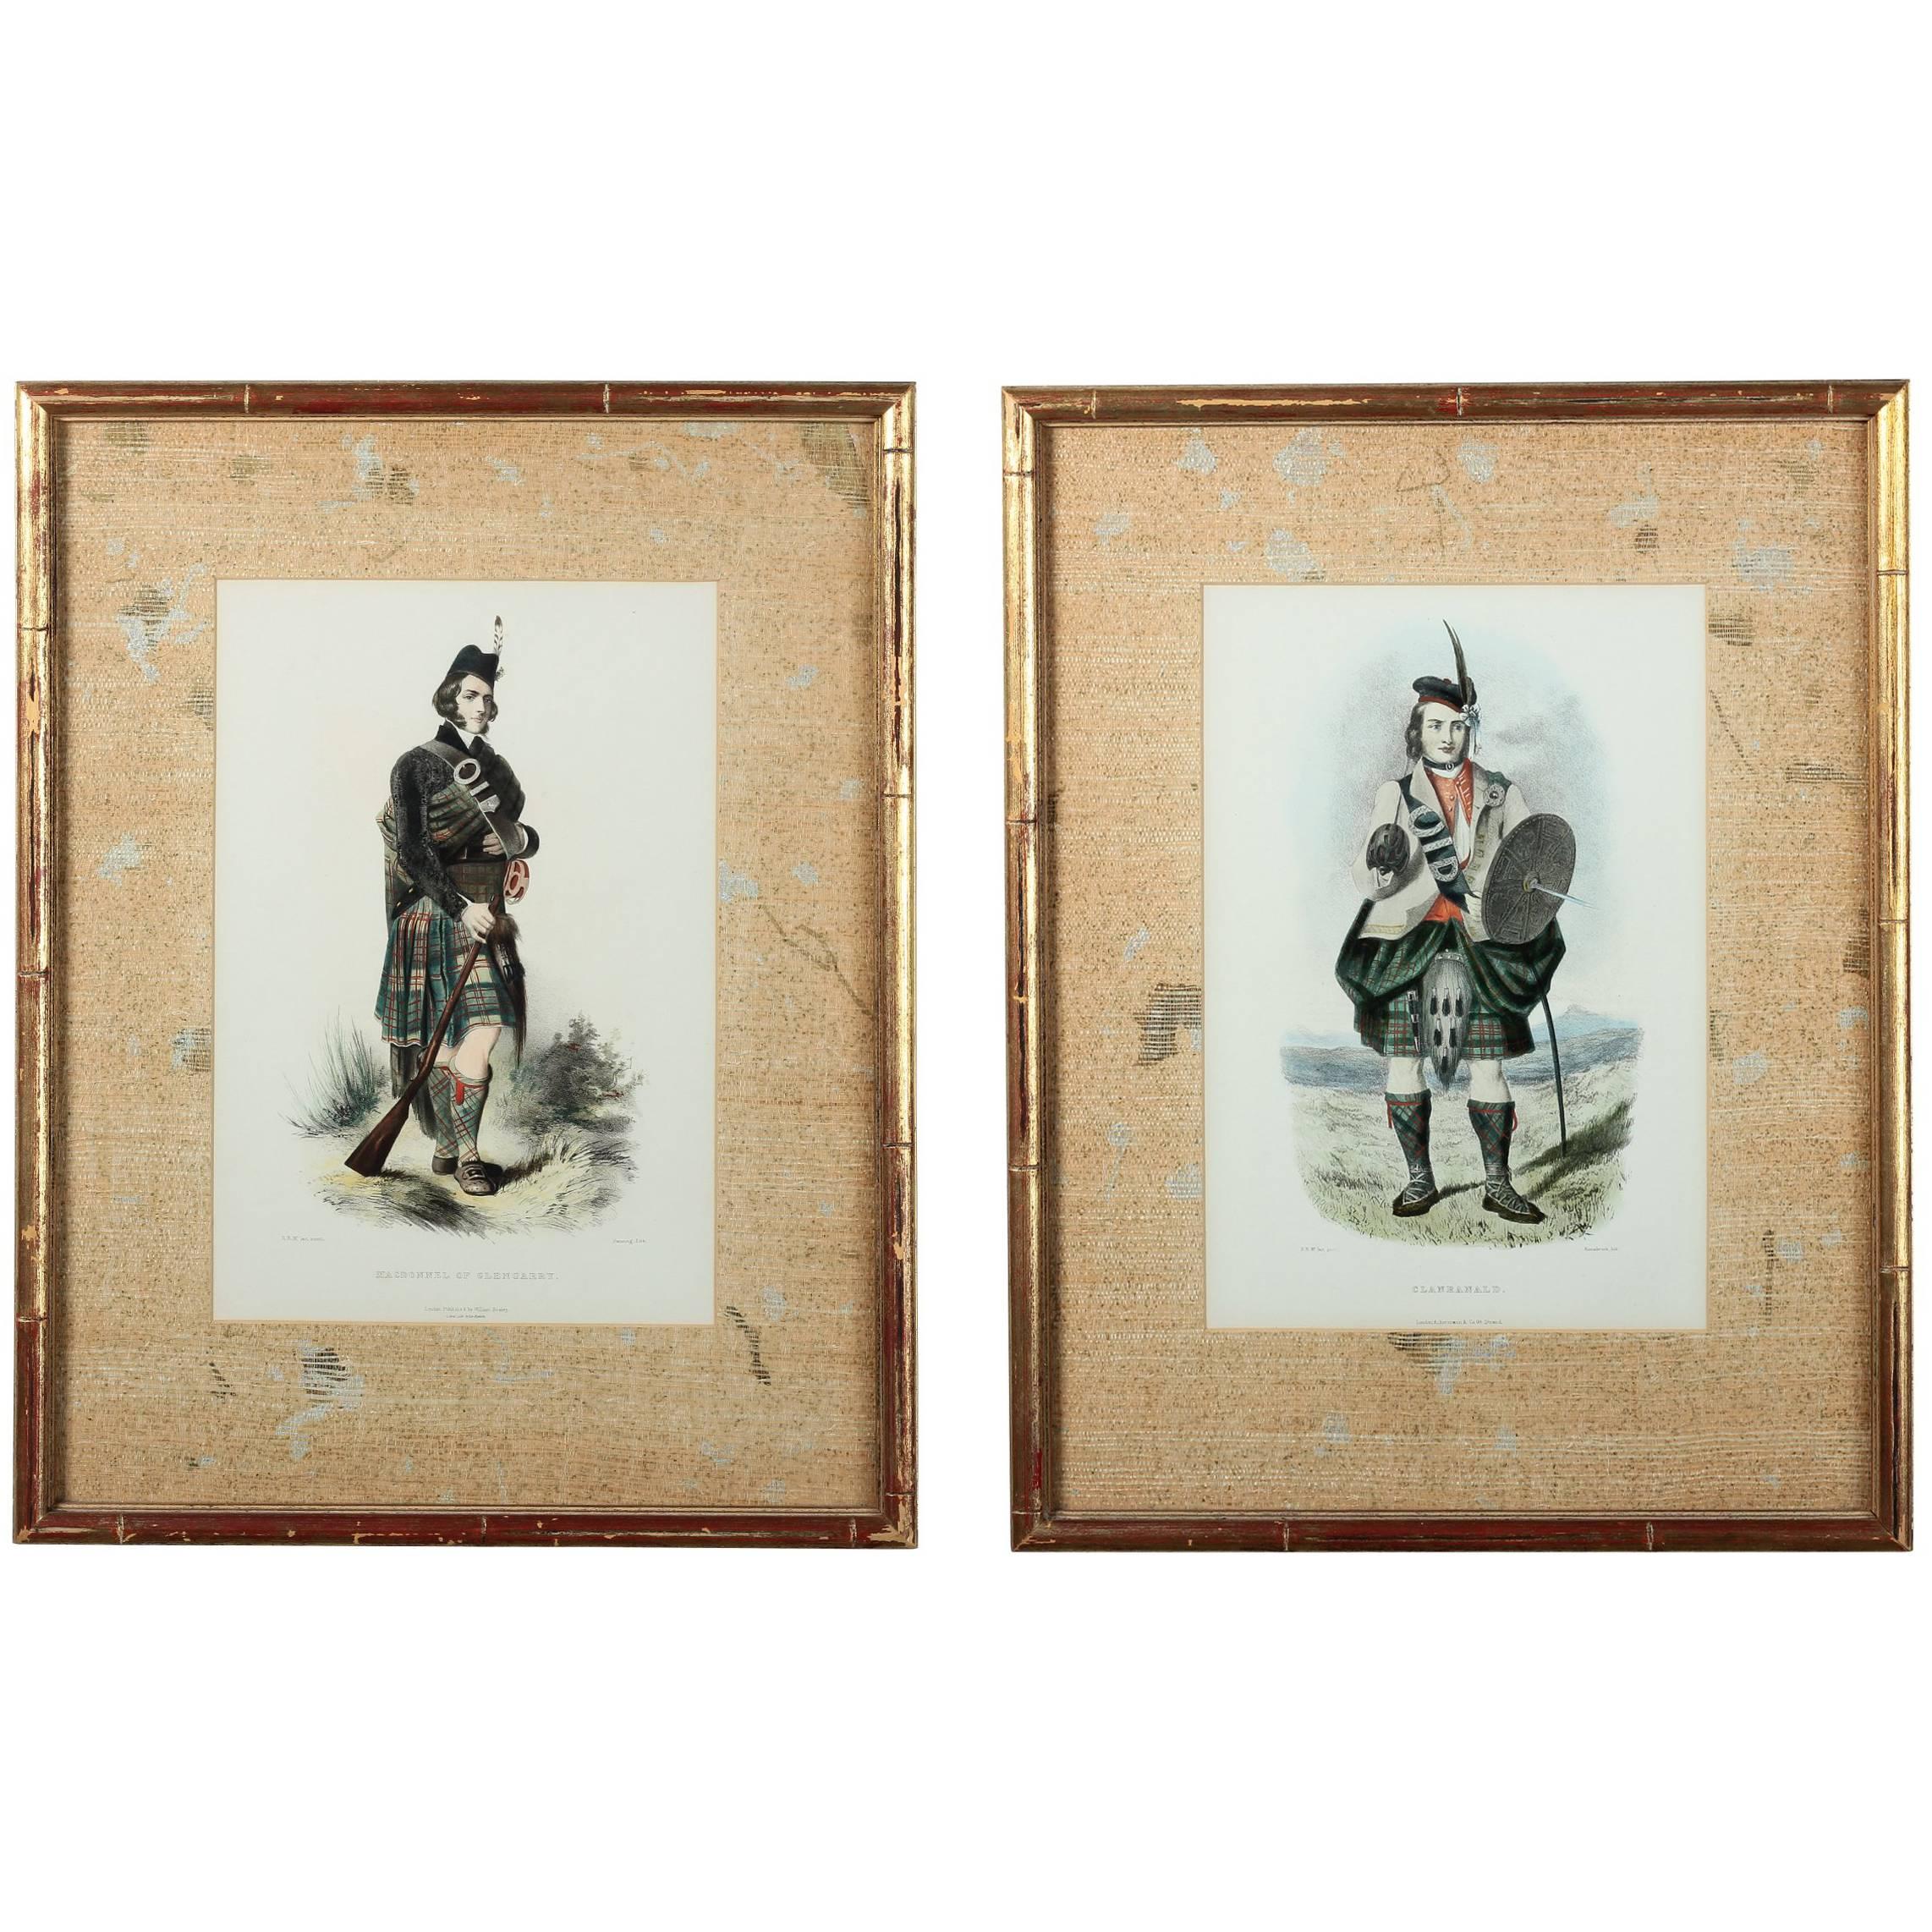 Pair of English Lithograph 'Scottish Clan Portraits' by Artist R.R. Mclan, 1847 For Sale